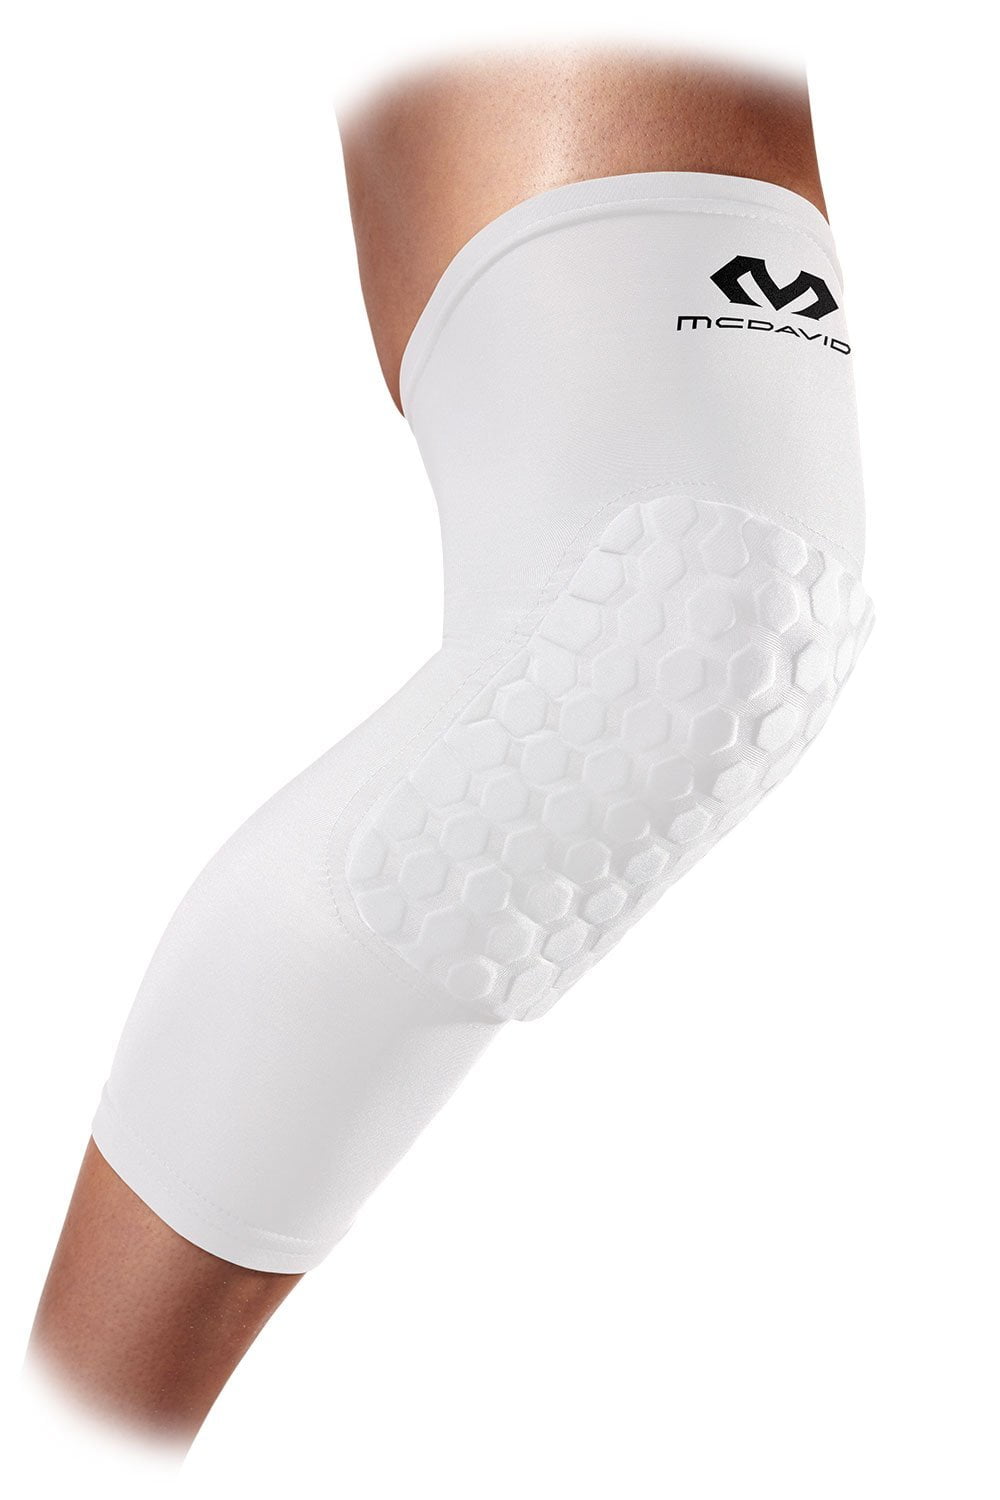 Knee Pad Compression Extended Support Leg Sleeve Hexpad Protective Hex 